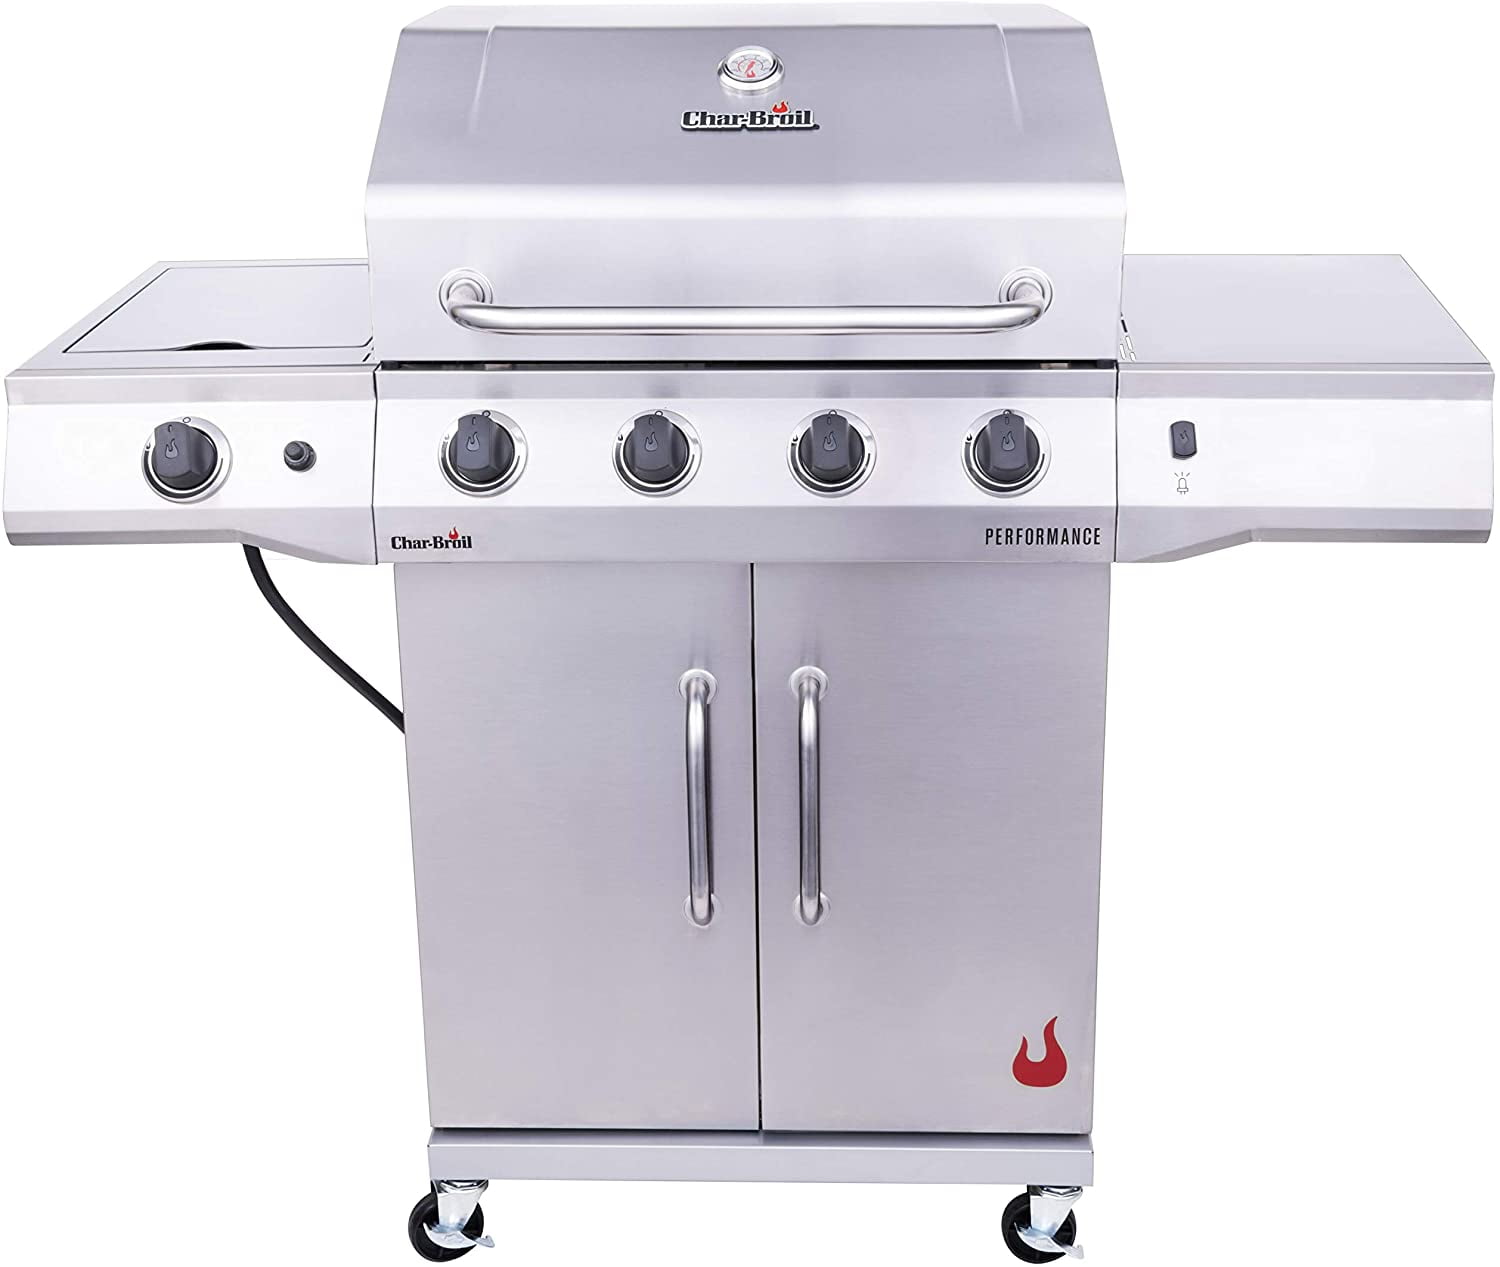 Char-Broil Performance Series 5-Burner Gas Grill with Cabinet